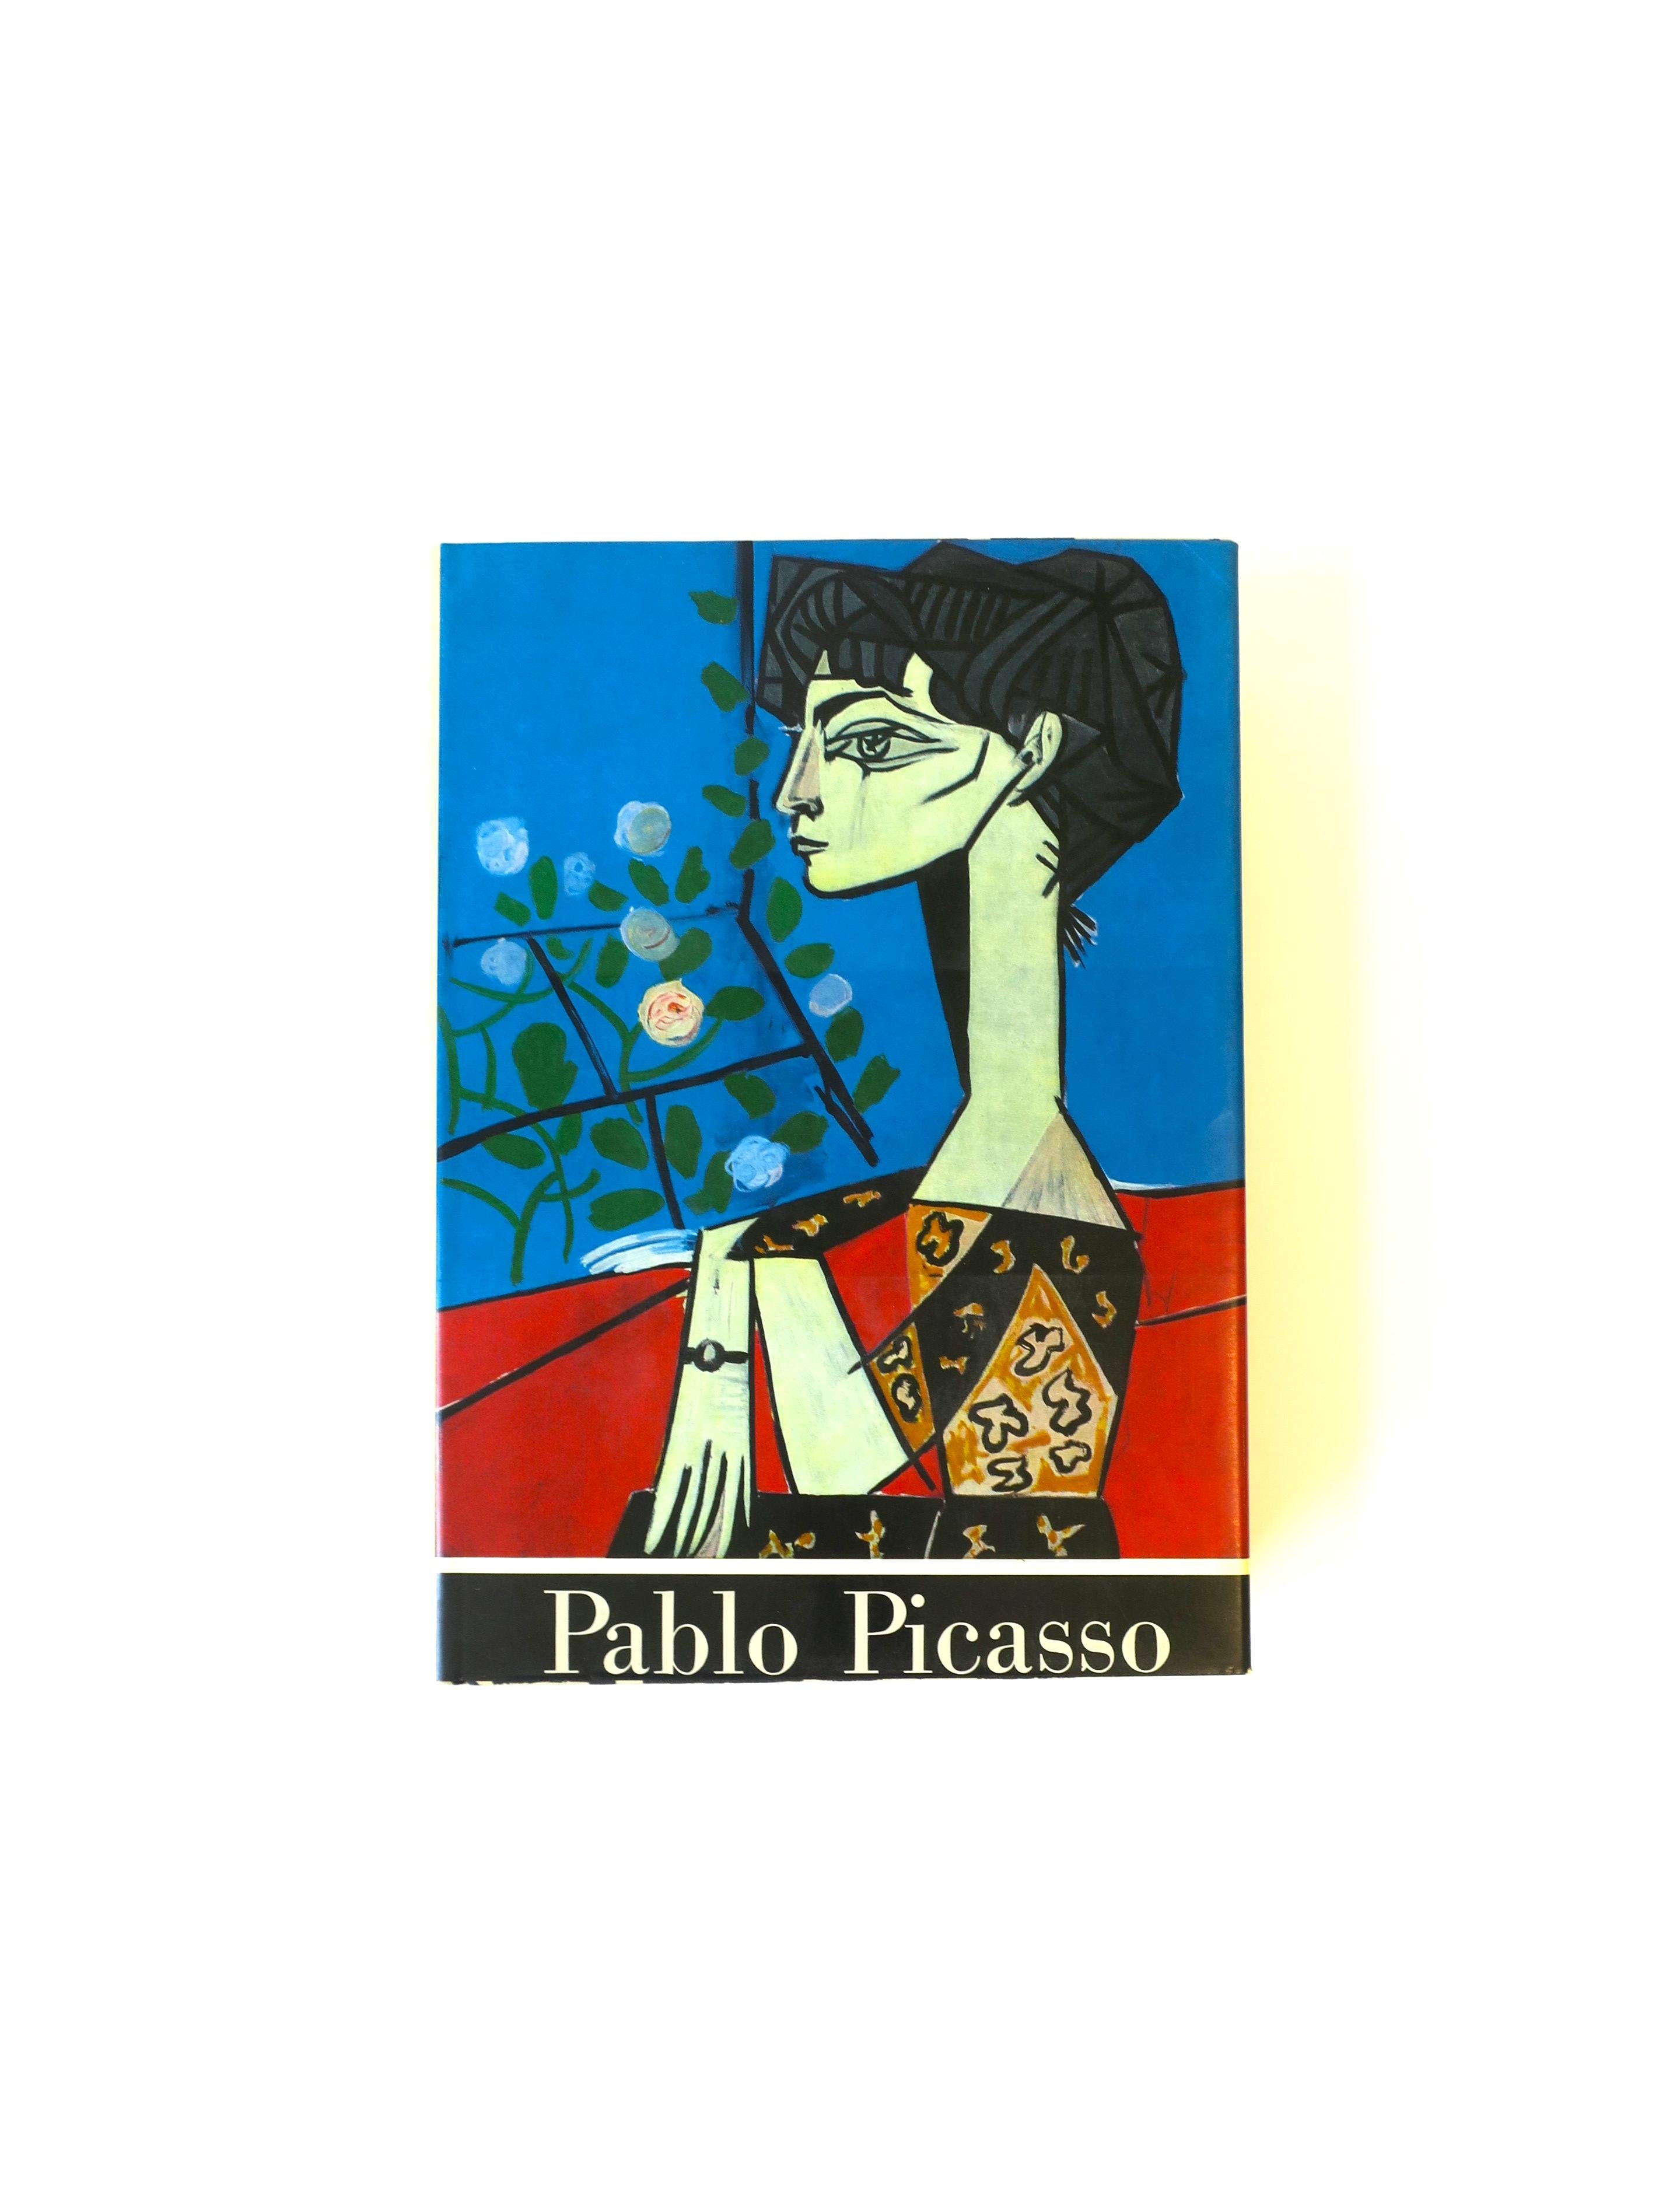 'Pablo Picasso', a library or coffee table book, 1955.
The cover design was made especially for this book by Pablo Picasso, July 1955. 
This book is a nice size with 524 pages. 

